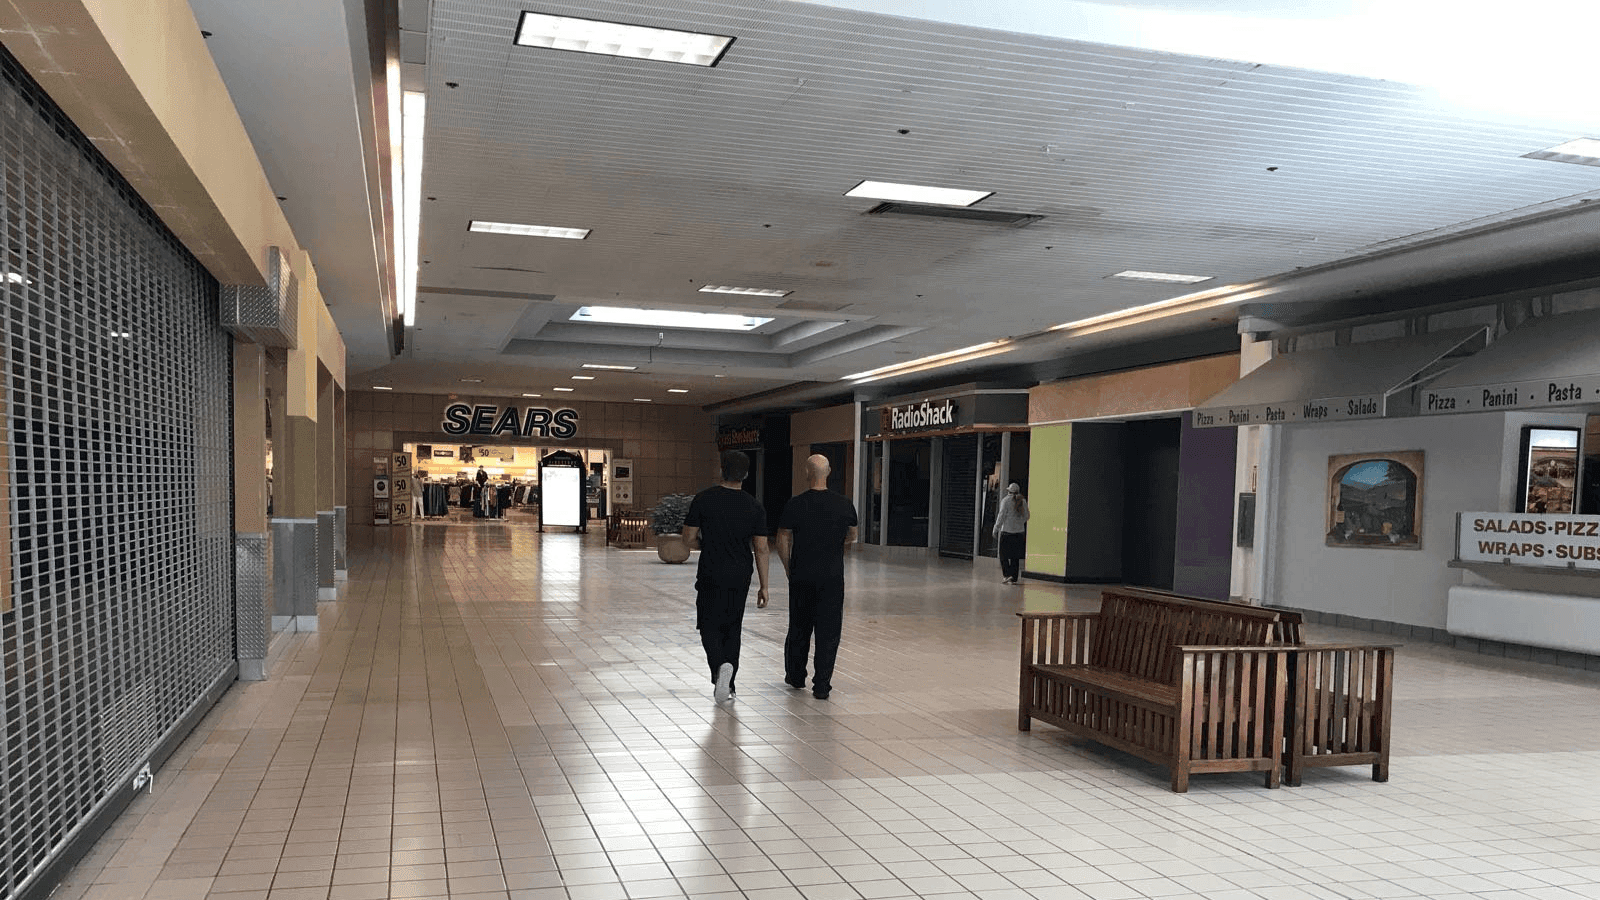 the interior of a nearly abandoned shopping mall in the US